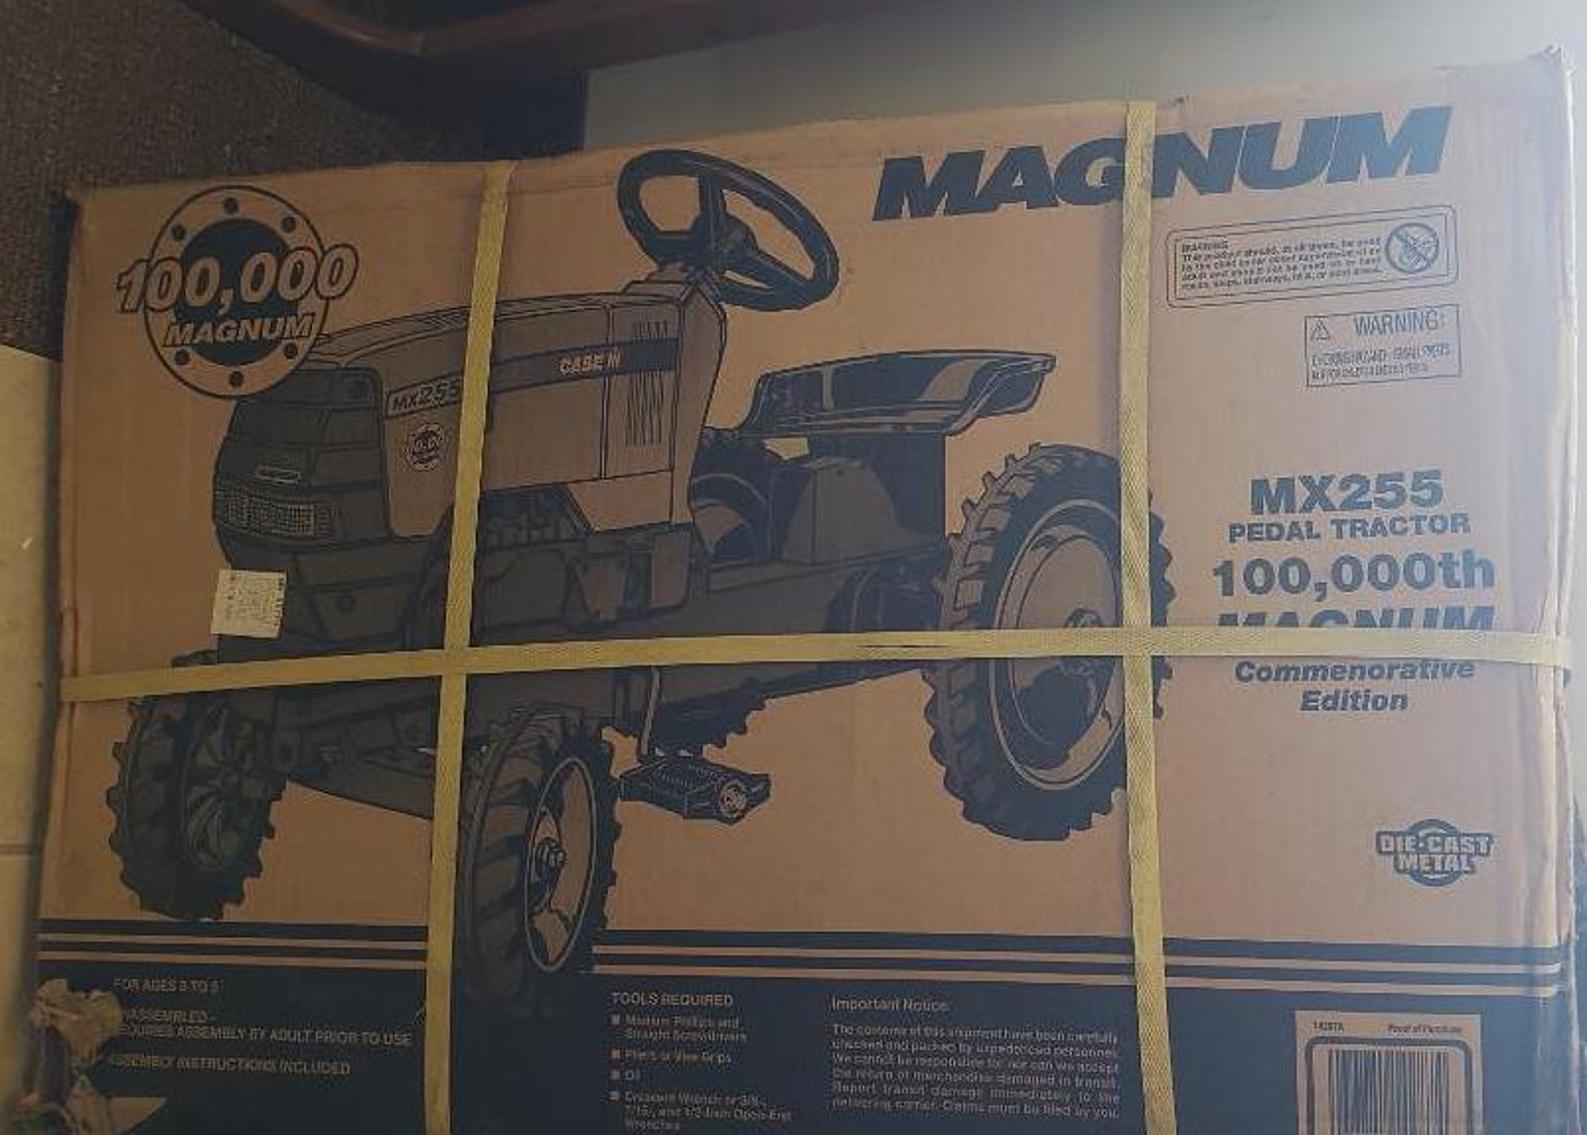 Magnum MX255 Pedal Tractor & Hardware Items from a Hardware Distribution Company. Direct From The Distributor: Closeout Items, Overstock & Cosmetic Shipping Damage